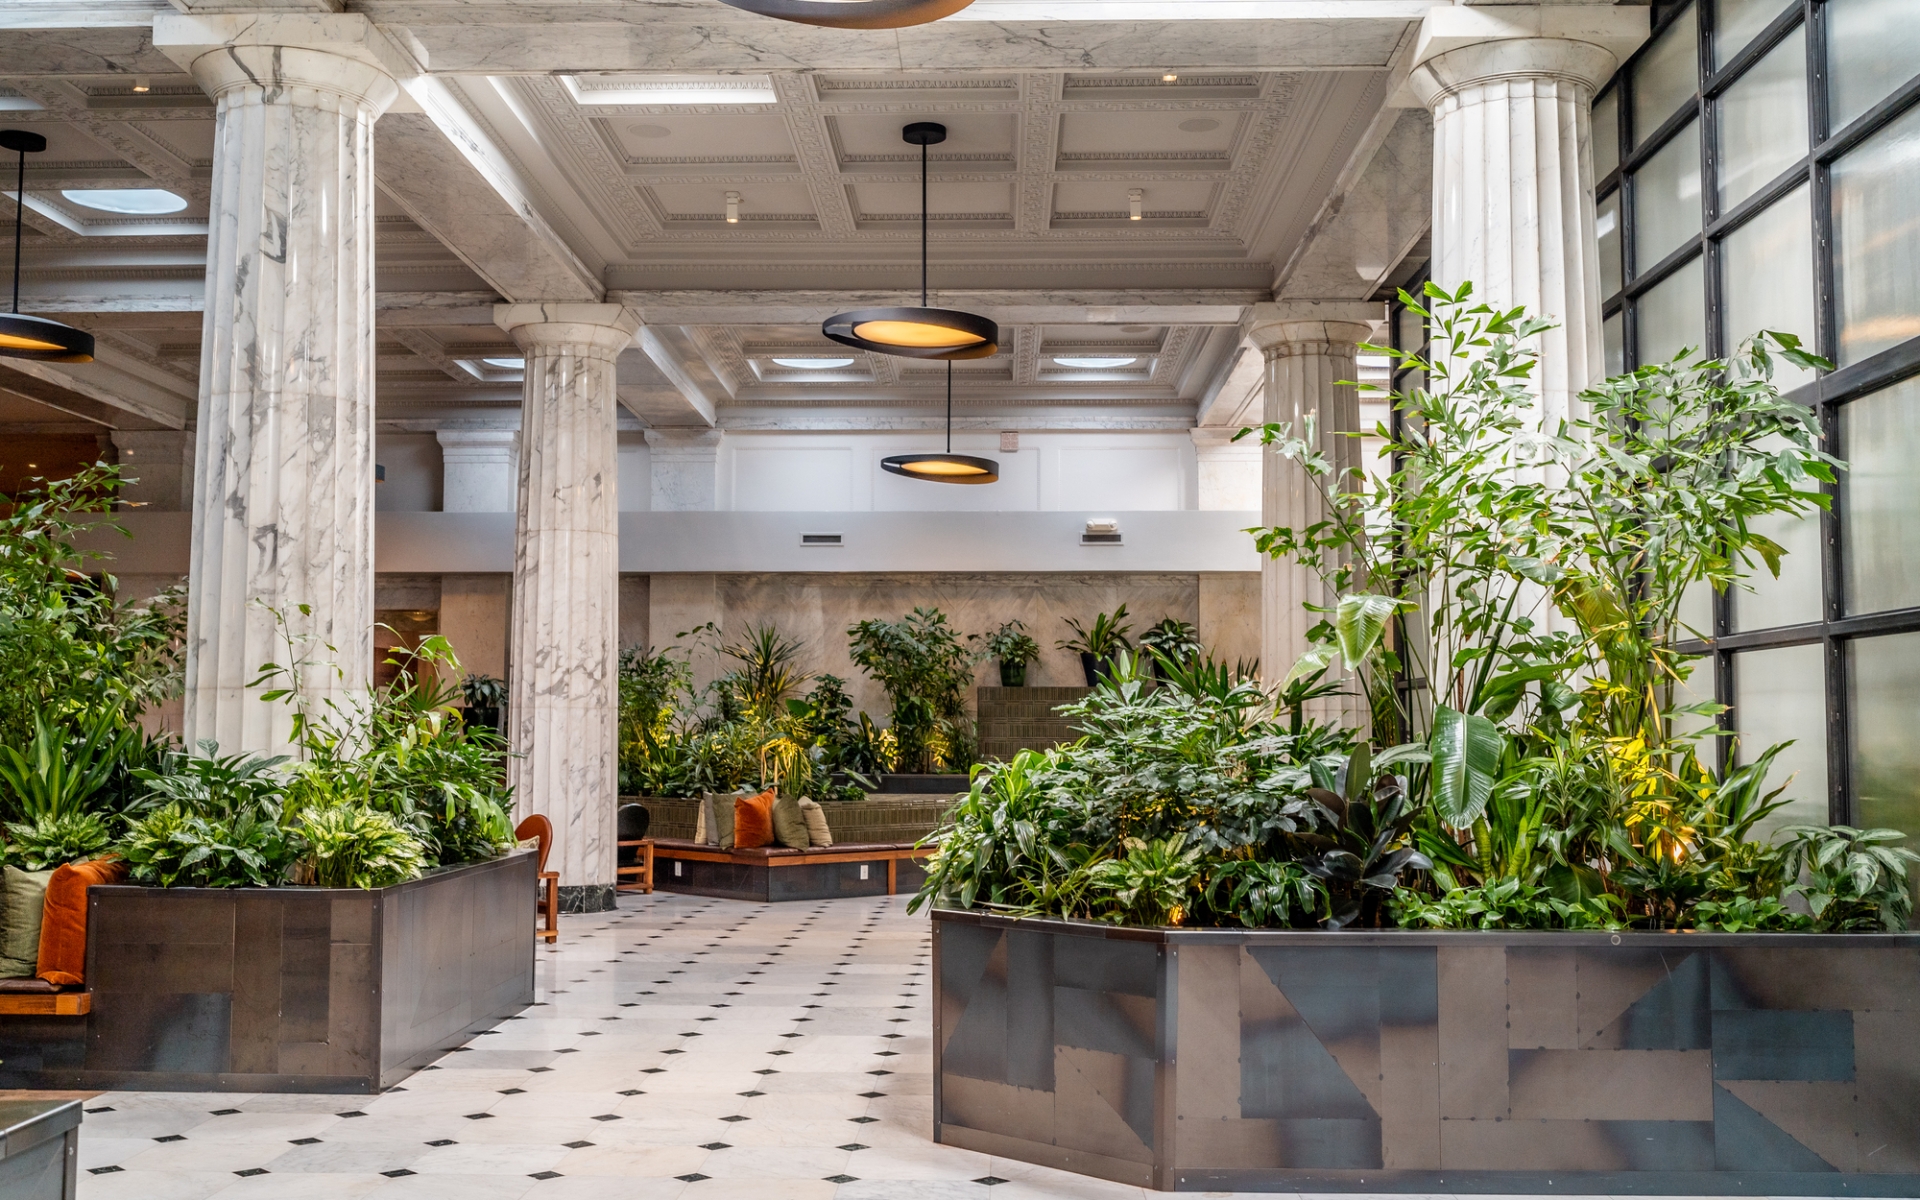 The lobby of Hotel Emery, with marble columns and plants